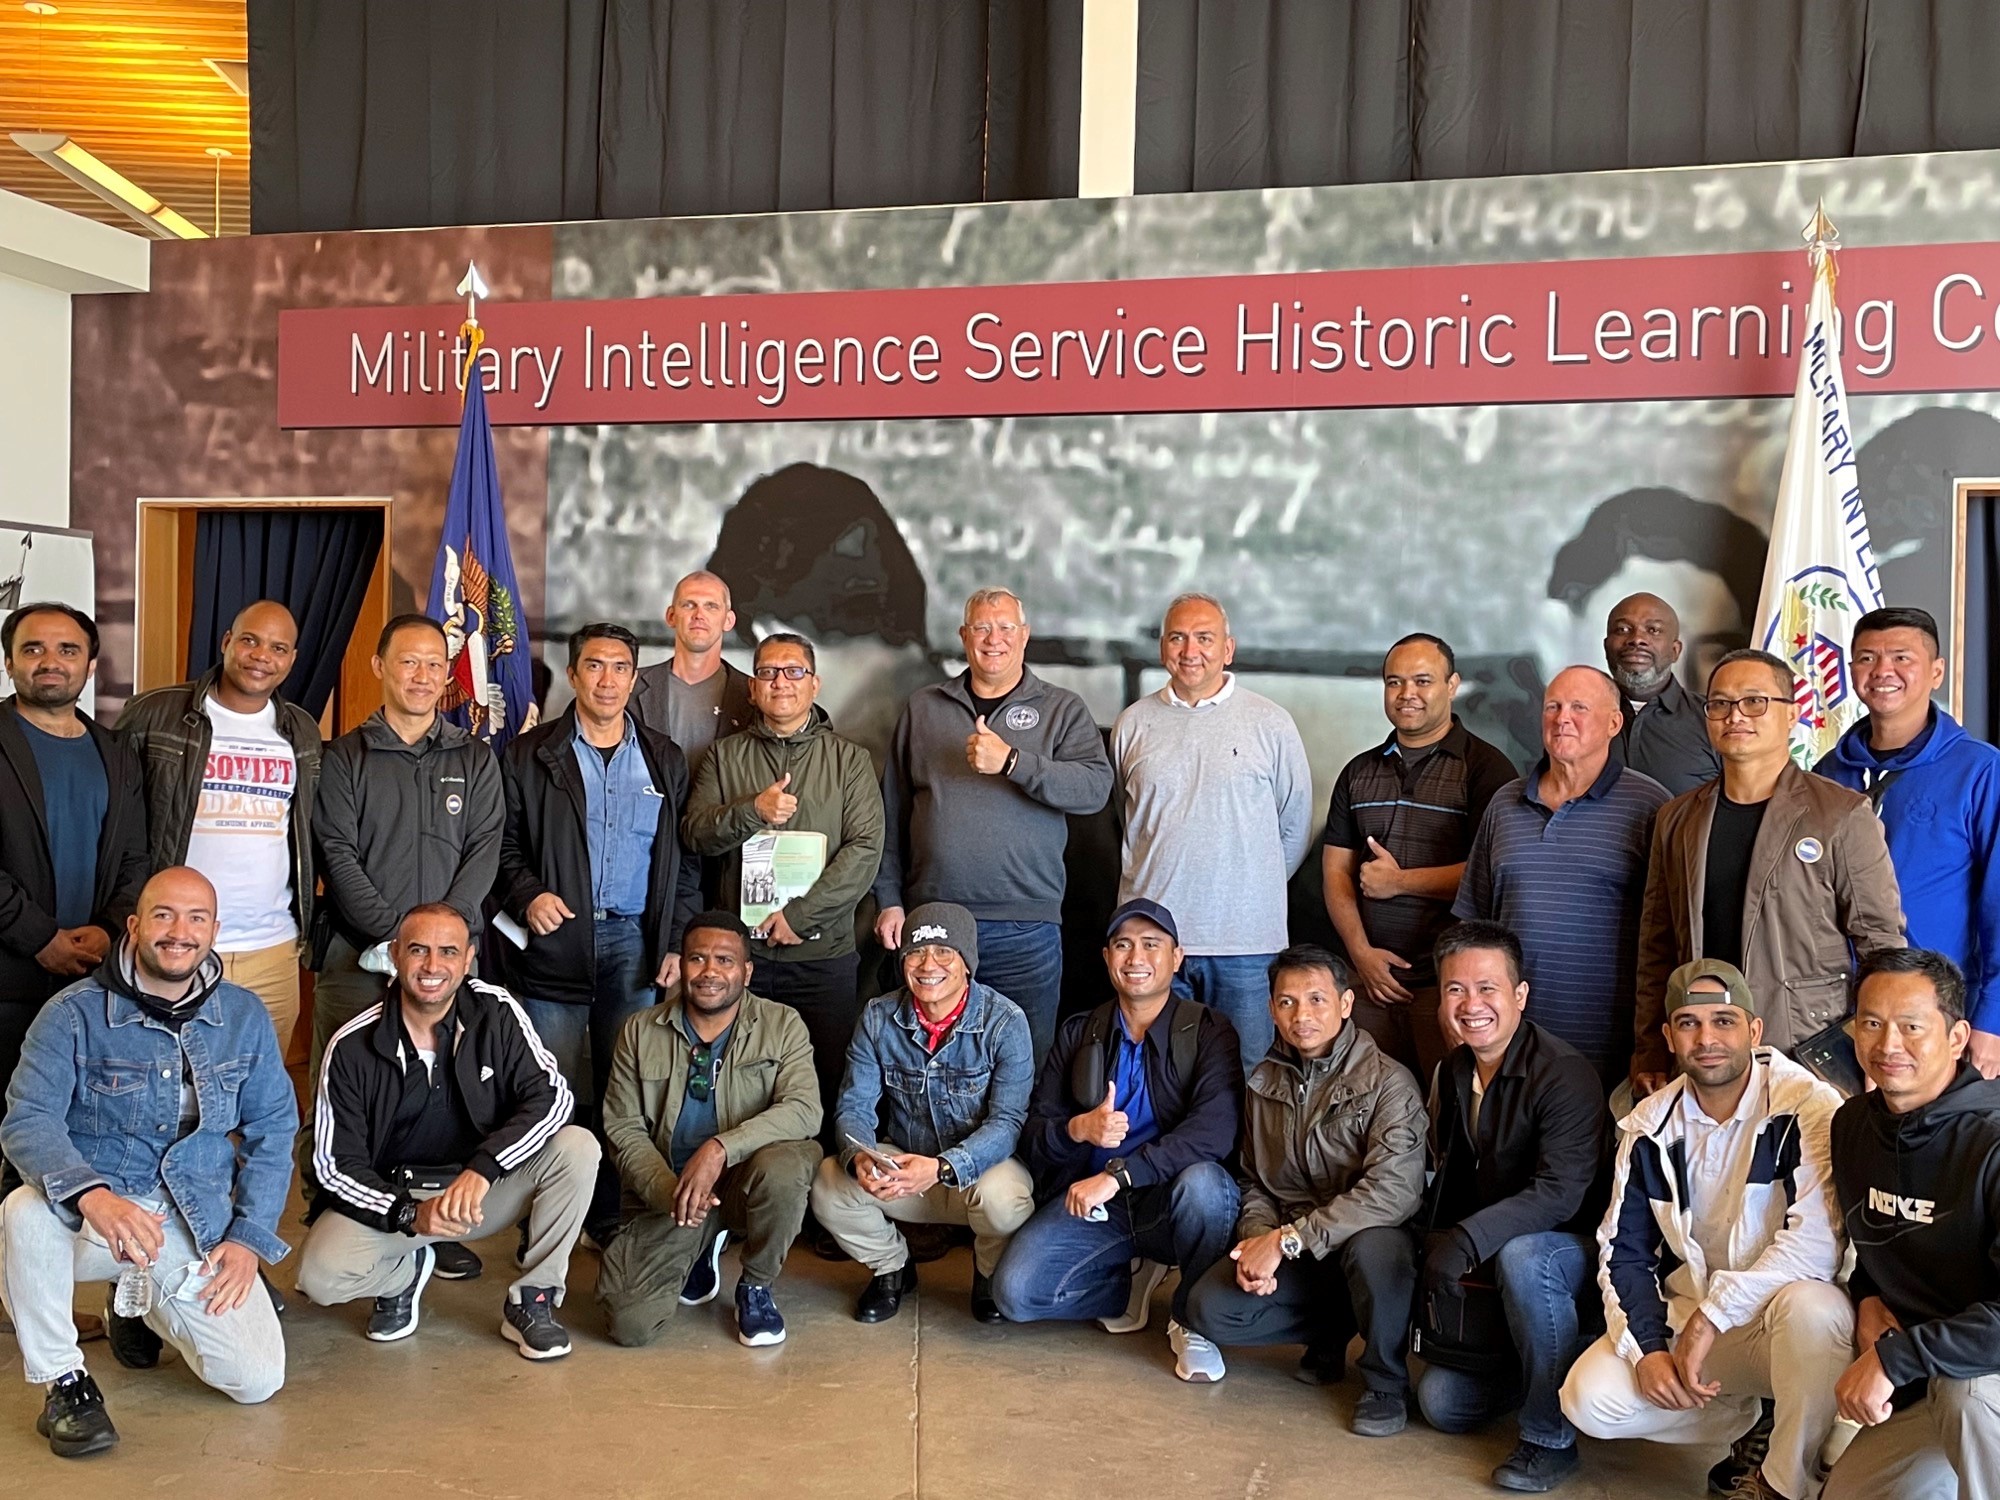 A group of various international participants posing in front of Military Intelligence Service Historic Learning